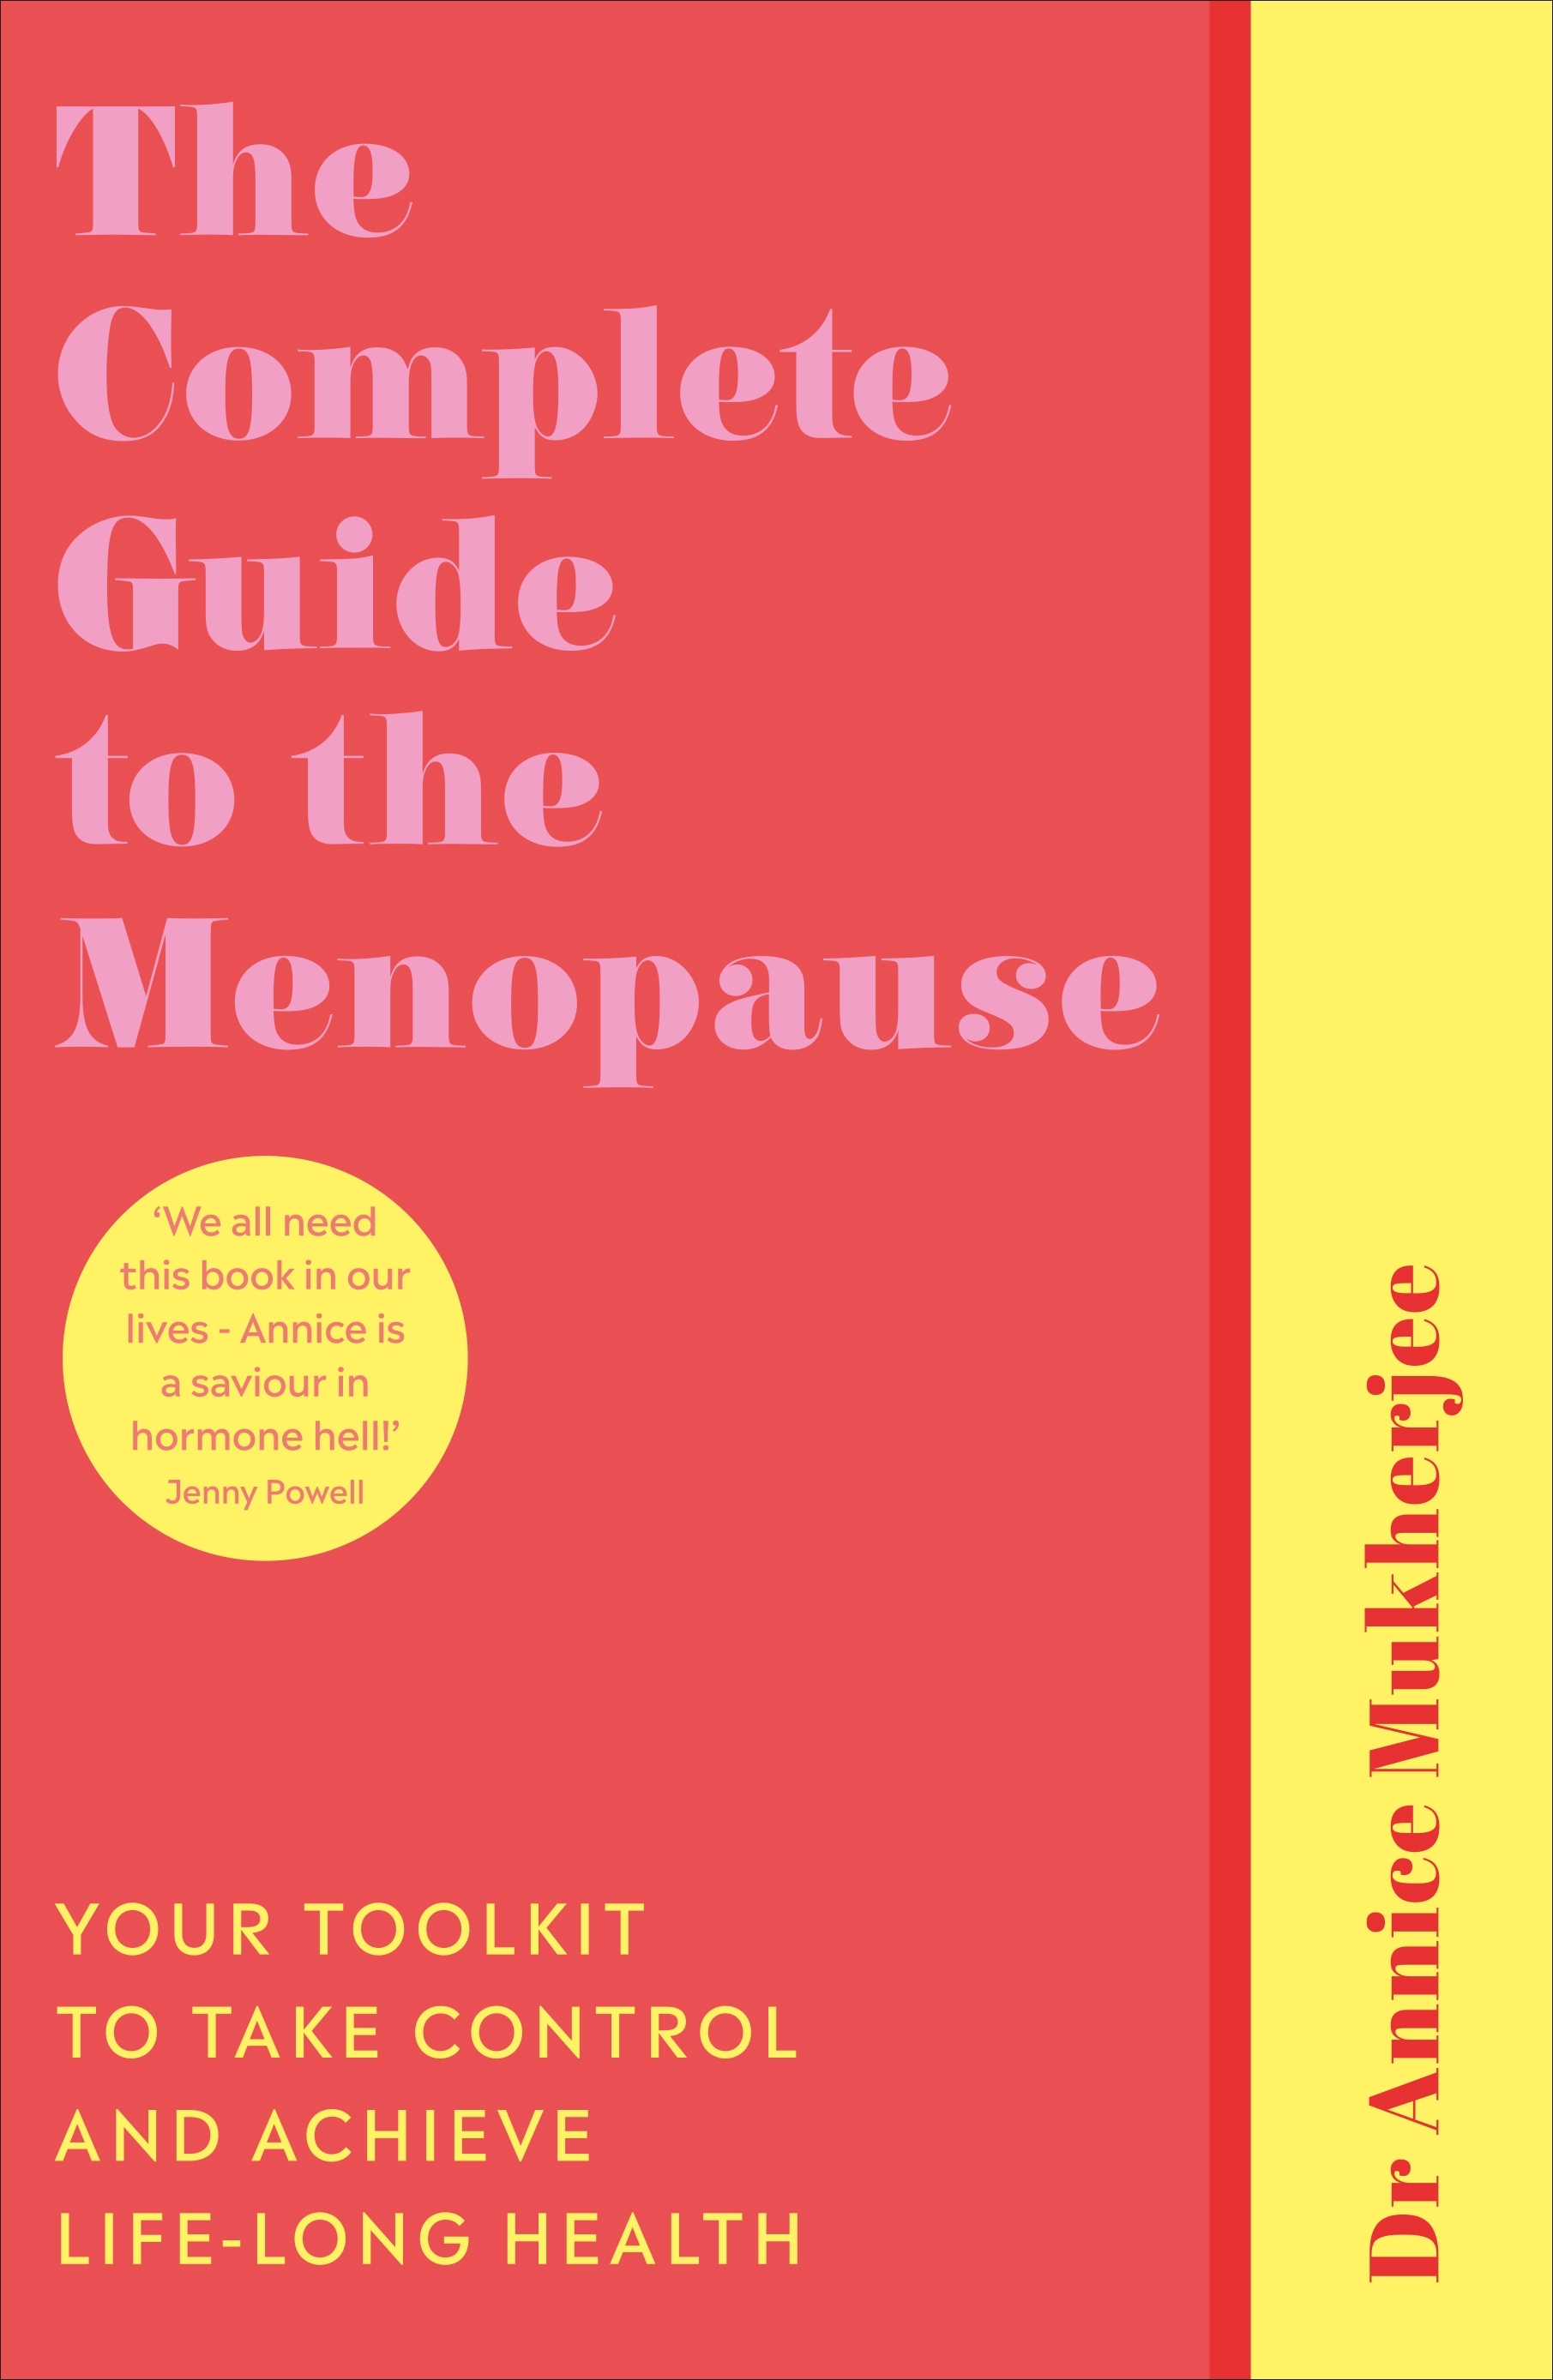 The Complete Guide To The Menopause By Annice Mukherjee Penguin Books Australia 2276